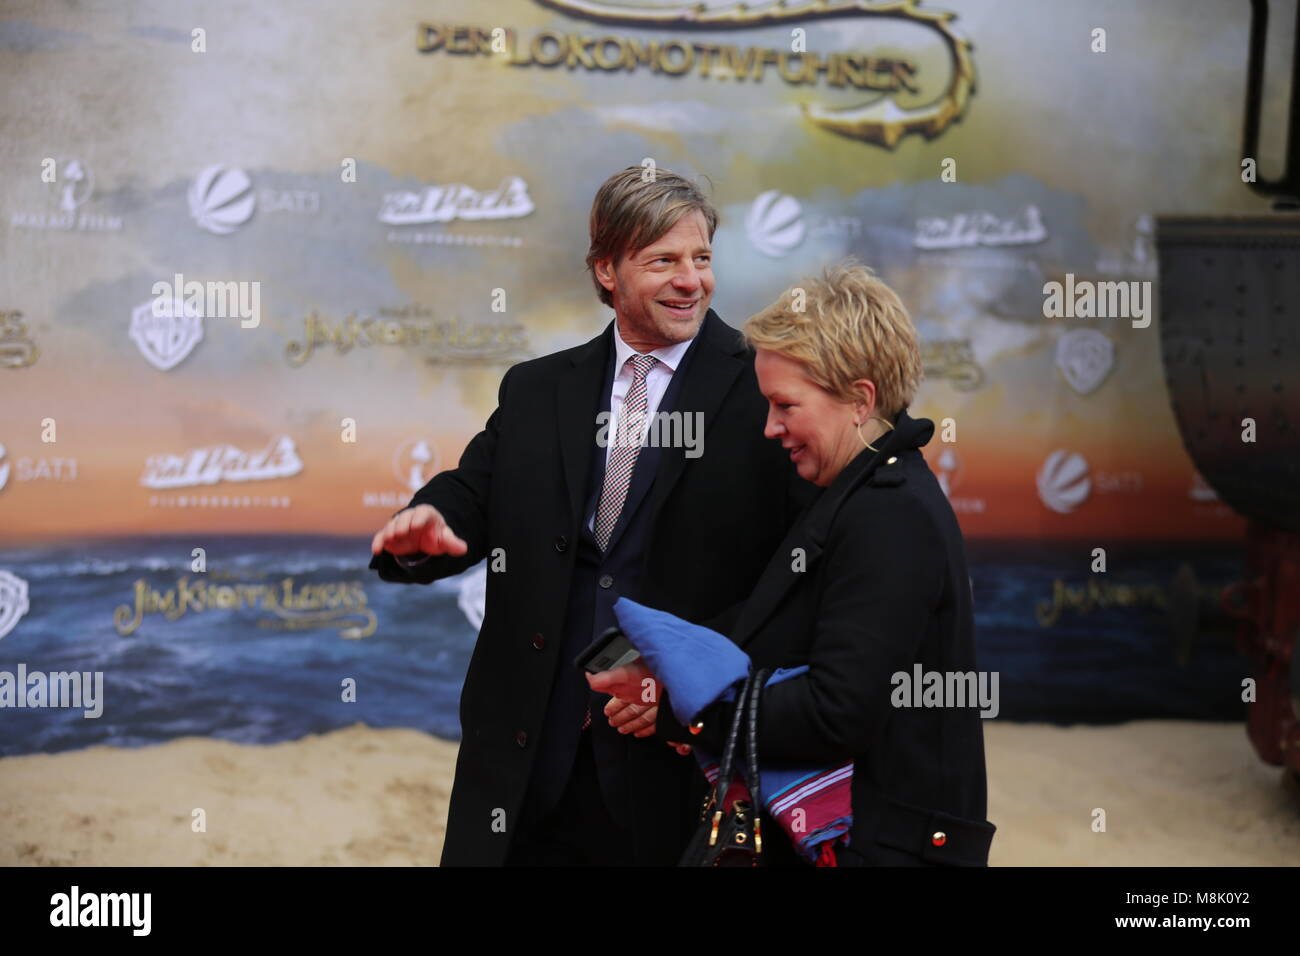 Berlin, Germany. 18th Mar, 2018. Berlin: The world premiere of 'Jim Knopf and Luke the locomotive driver' in front of the Sony Center on Potsdamer Platz. The photo shows the acto rHenning Baum on the red carpet. Credit: Simone Kuhlmey/Pacific Press/Alamy Live News Stock Photo